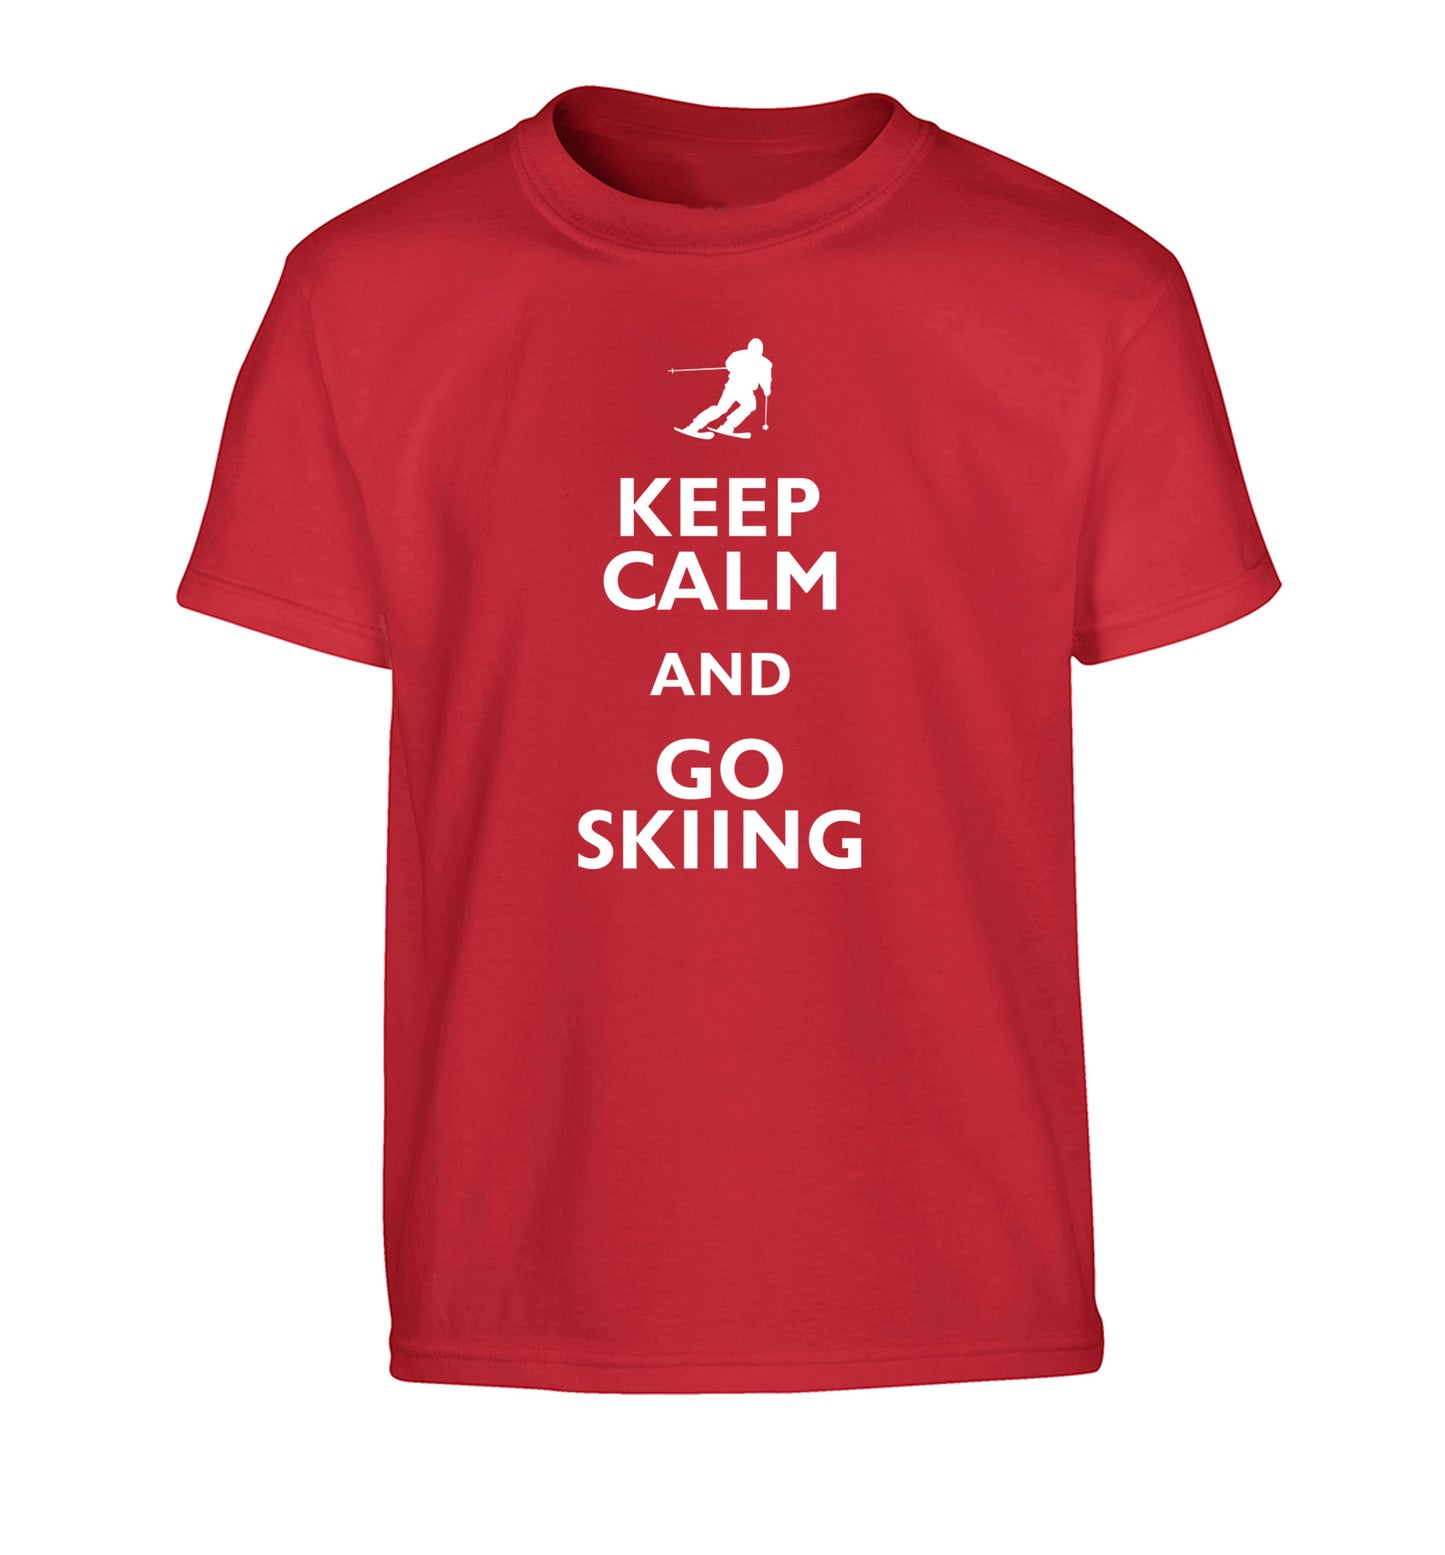 Keep calm and go skiing Children's red Tshirt 12-14 Years